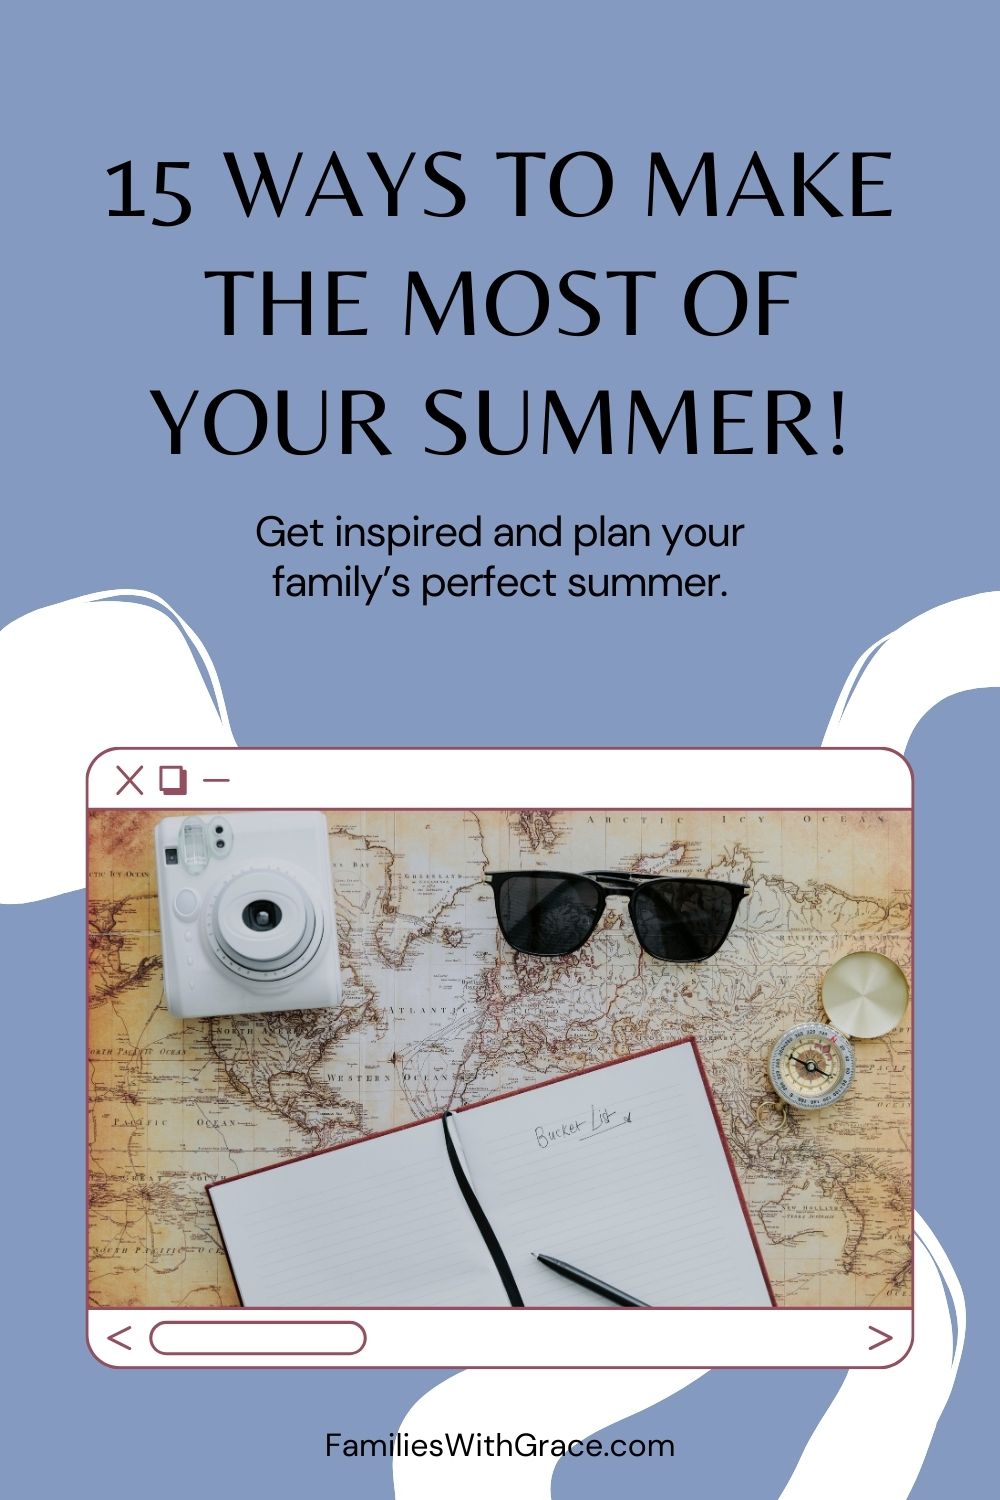 Summer planning ideas and tips for family fun